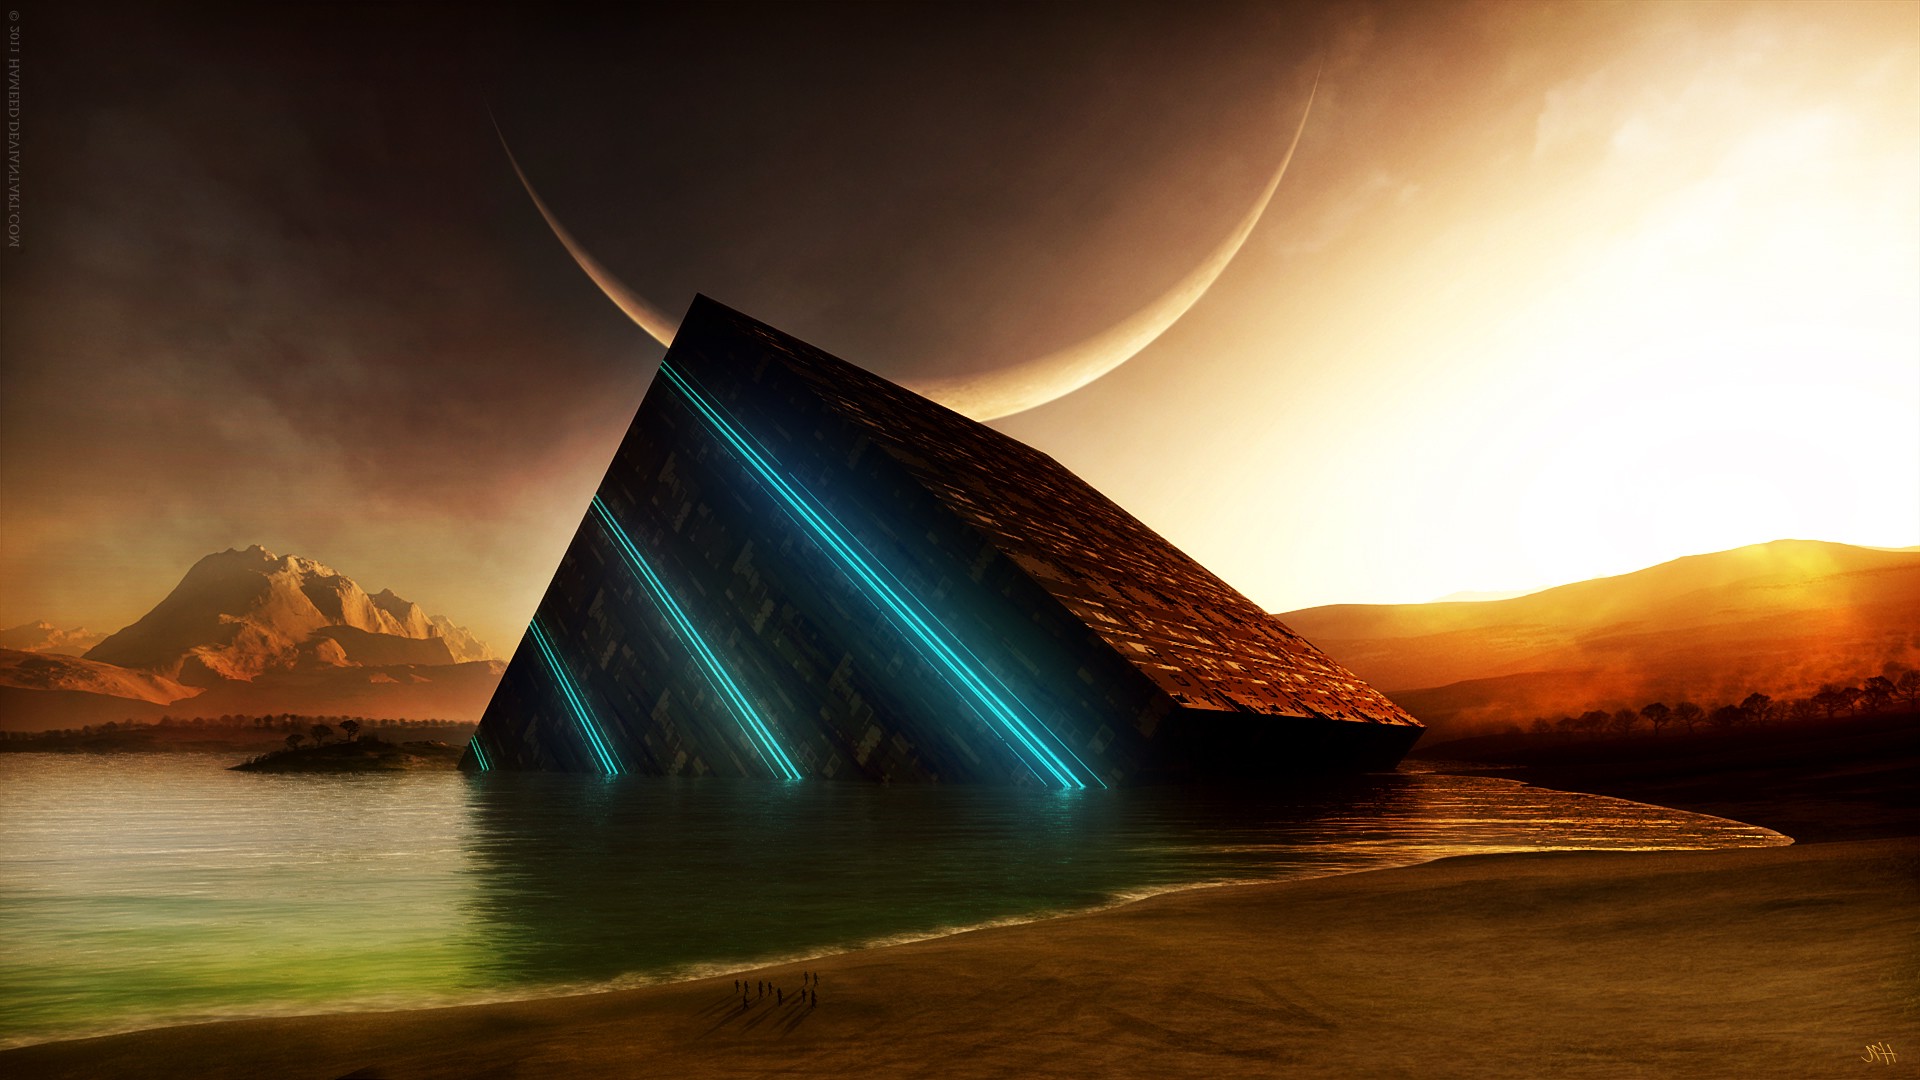 sunset, Abstract, Moon, Science Fiction, Water, Crescent Moon, Cube, Digital Art, Mountain, Glowing Wallpaper